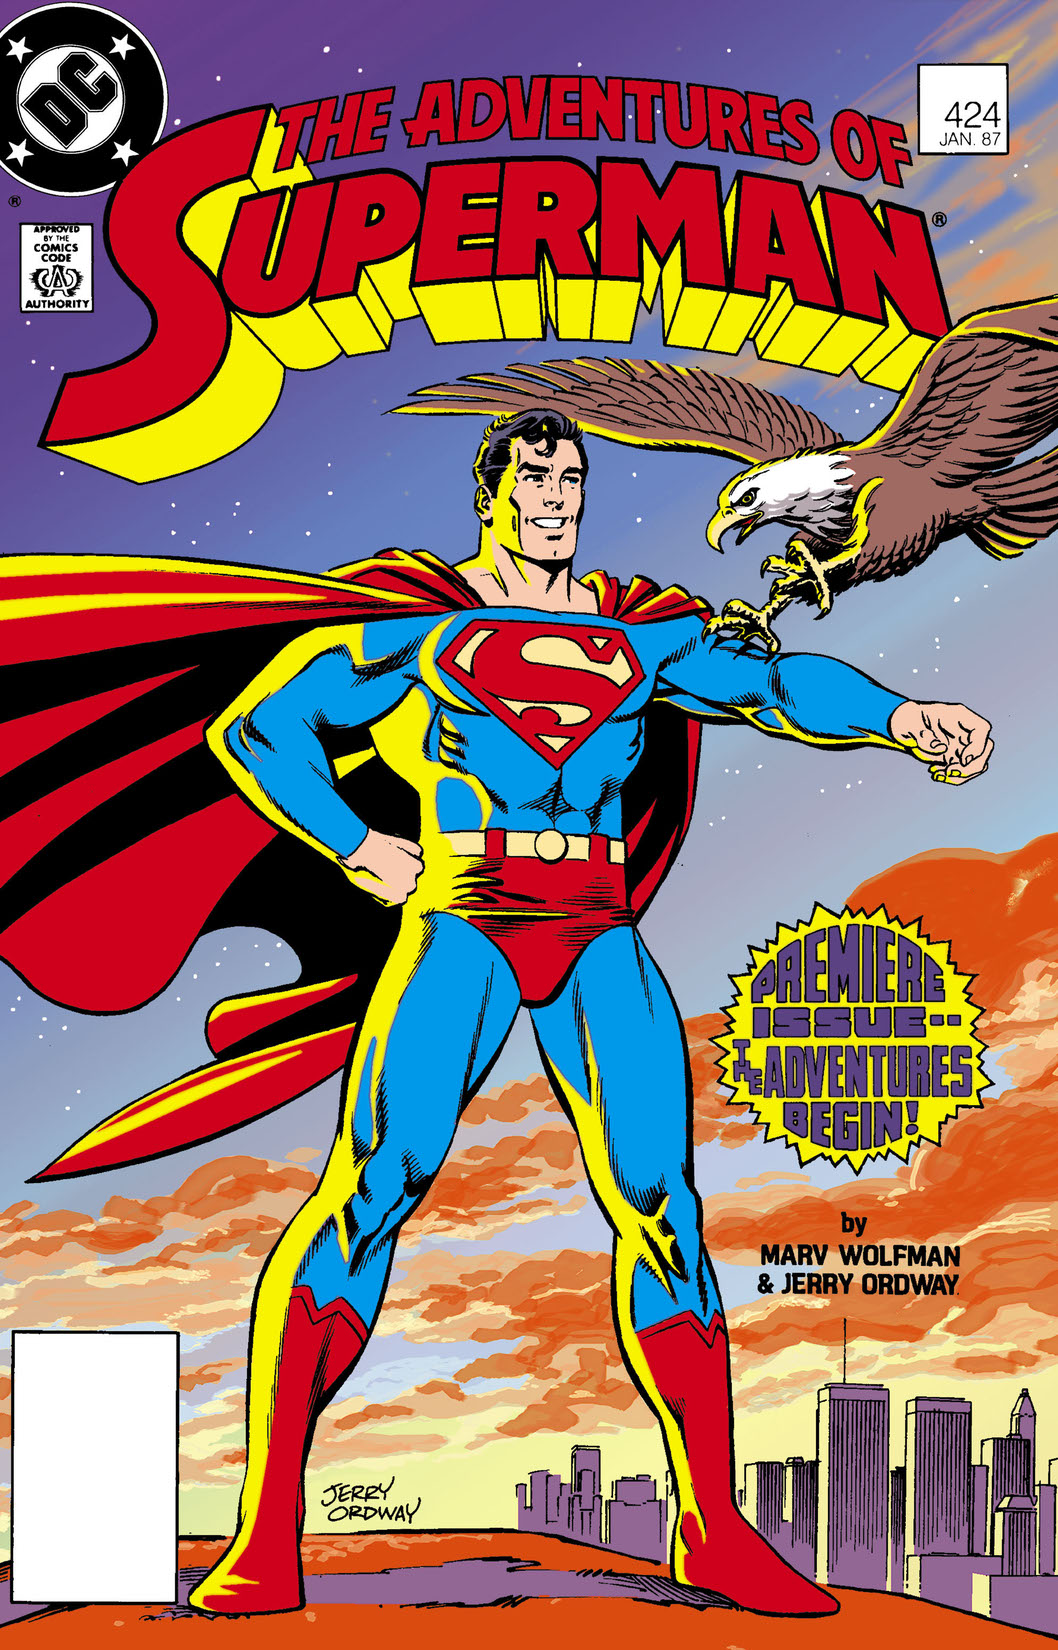 Adventures of Superman (1987-2006) #424 preview images